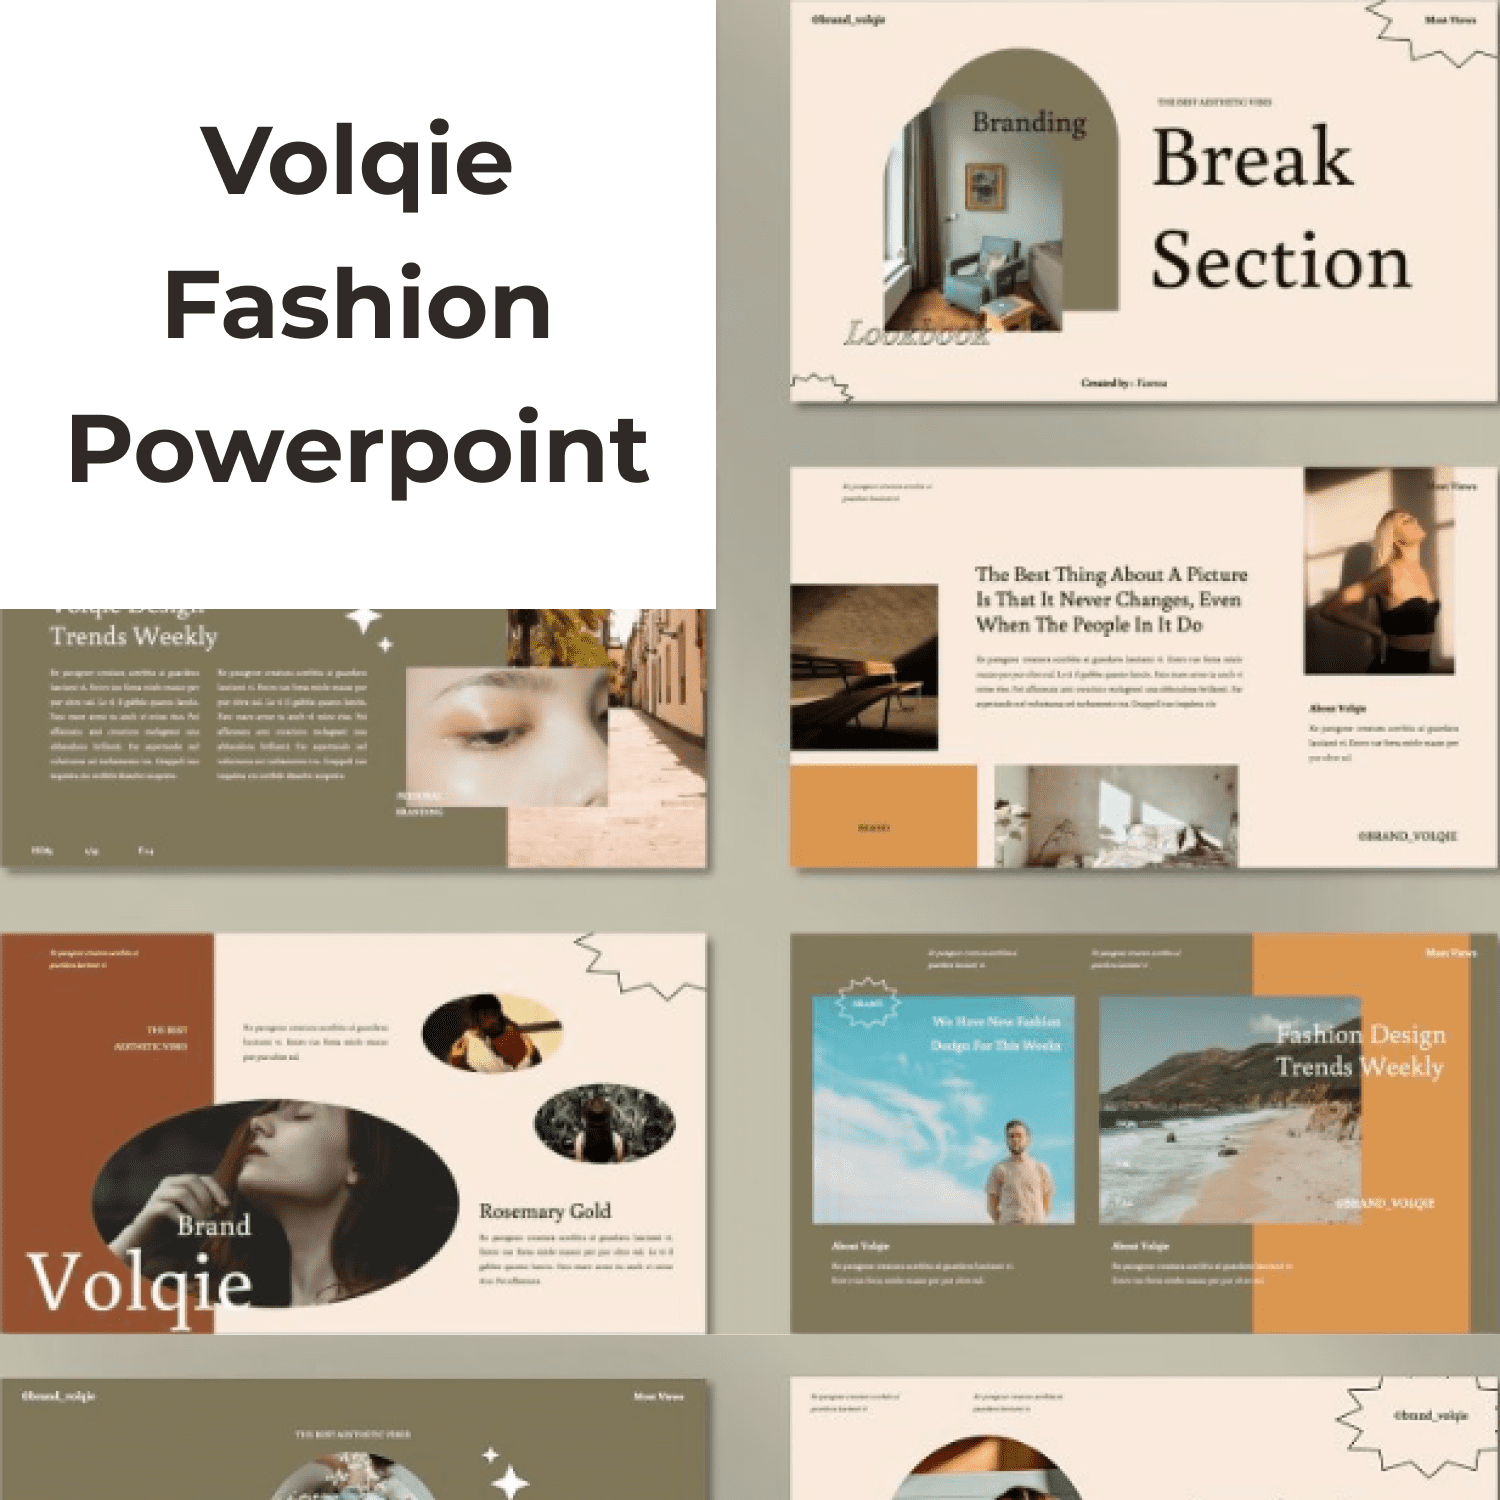 Volqie - Fashion Powerpoint cover image.